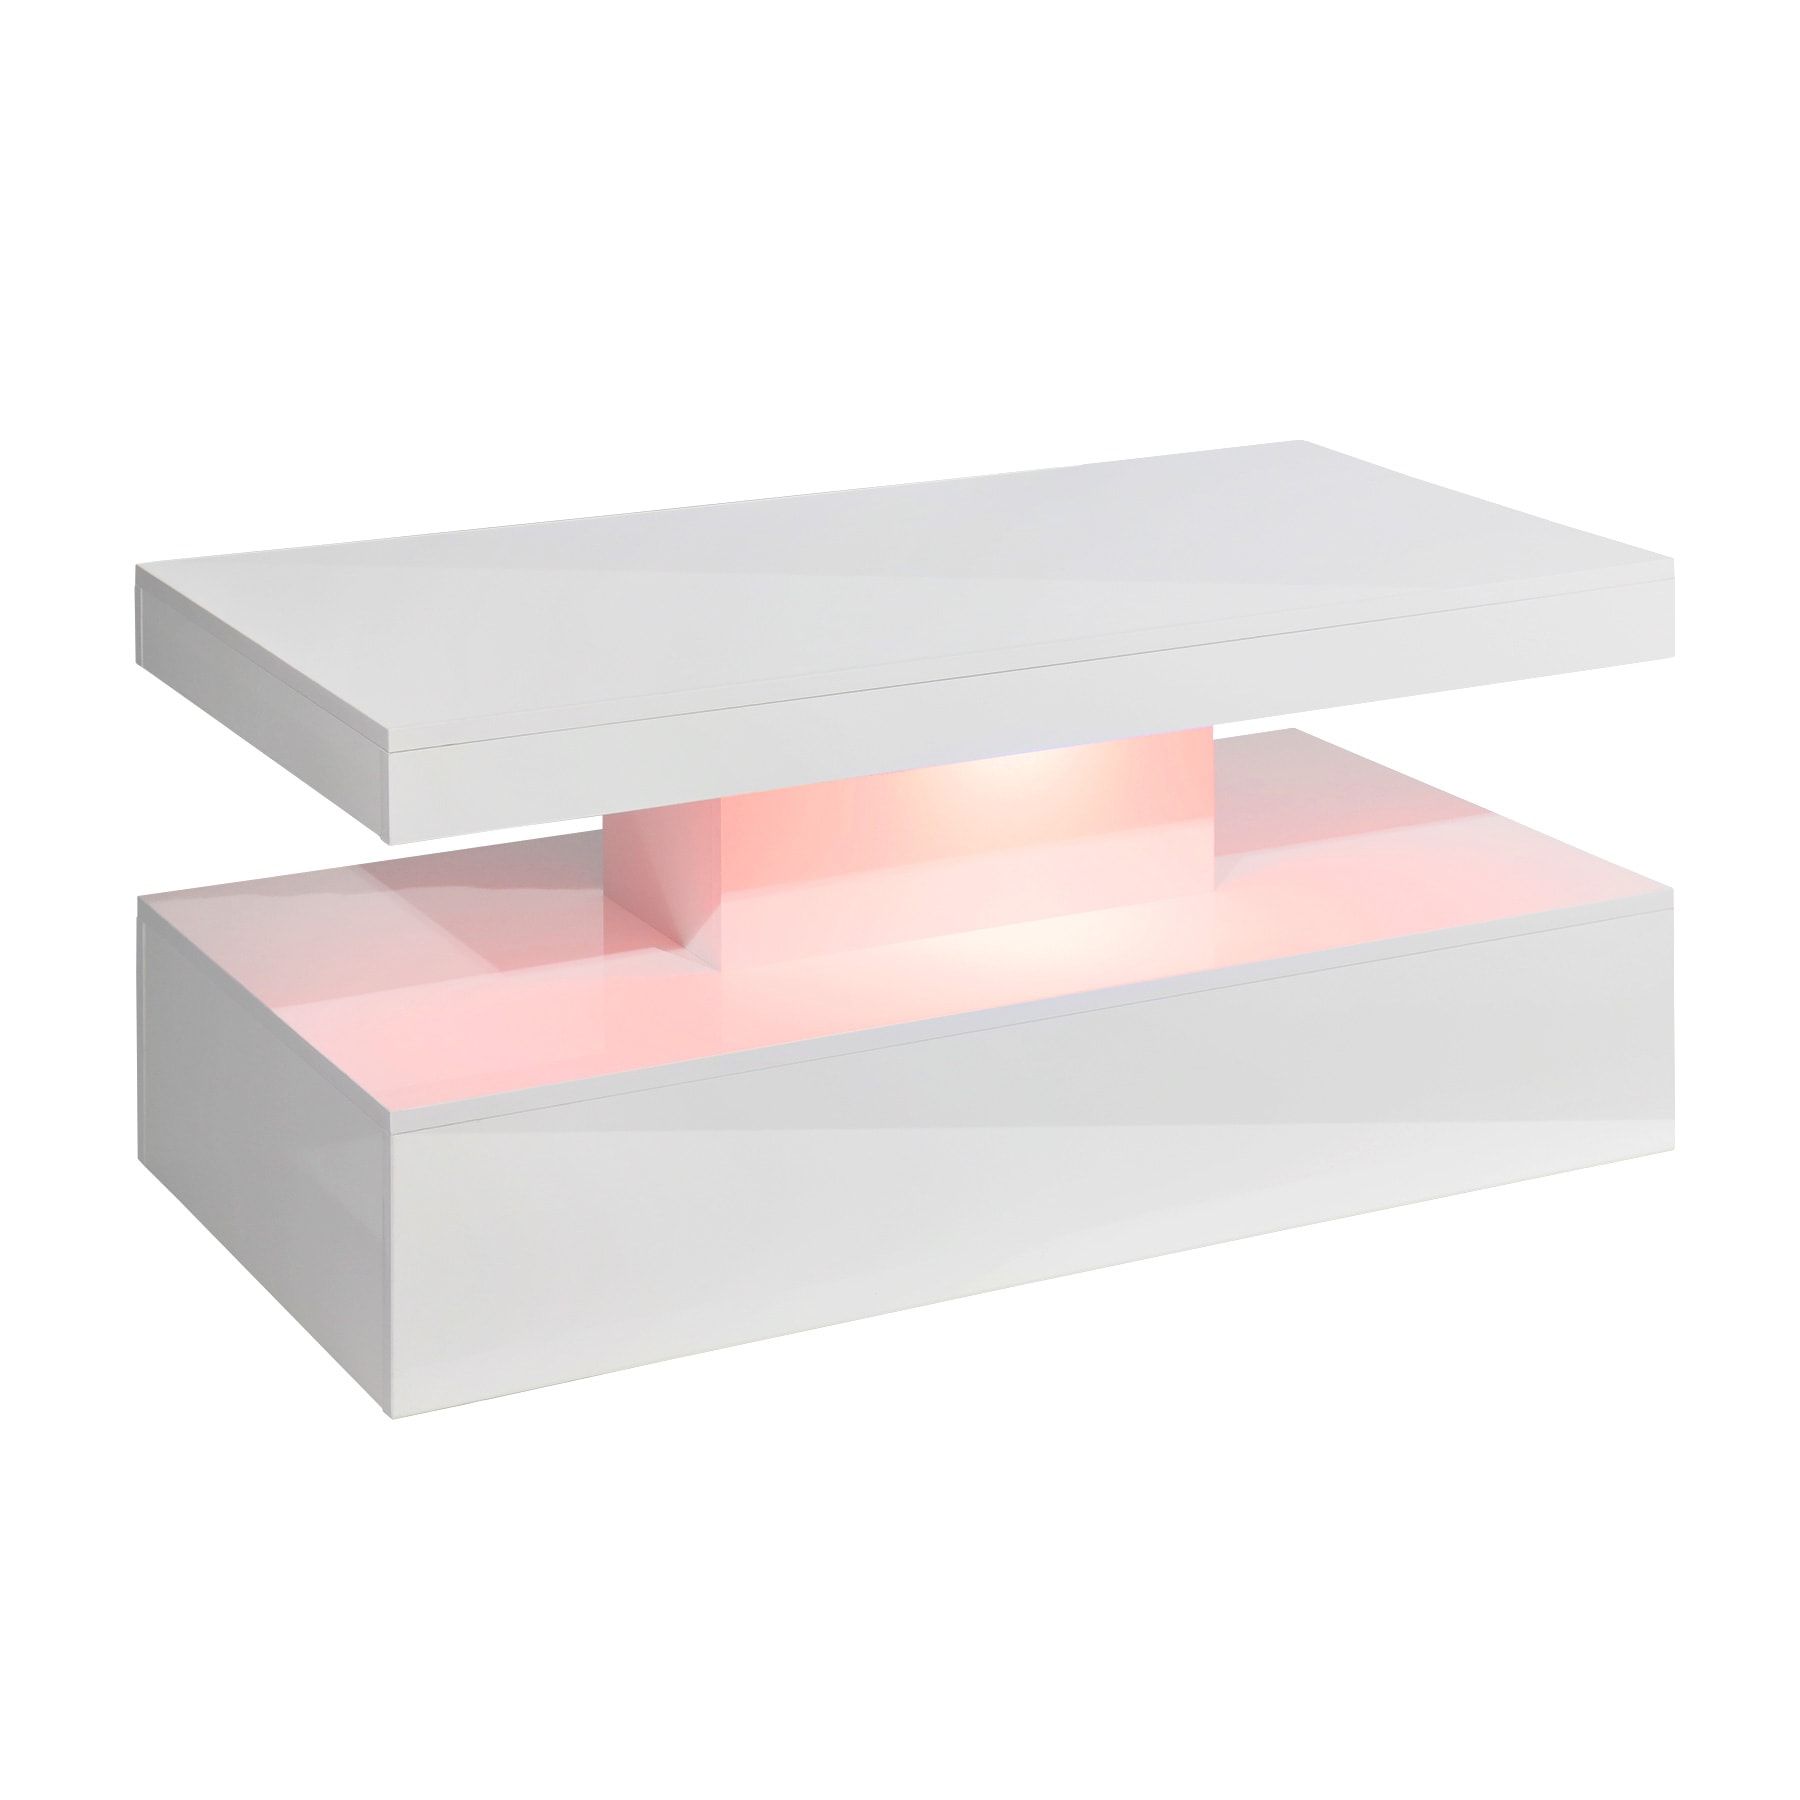 White Coffee Table With Rgb Led Lighting | Mmt Furniture Intended For Rectangular Led Coffee Tables (View 12 of 15)